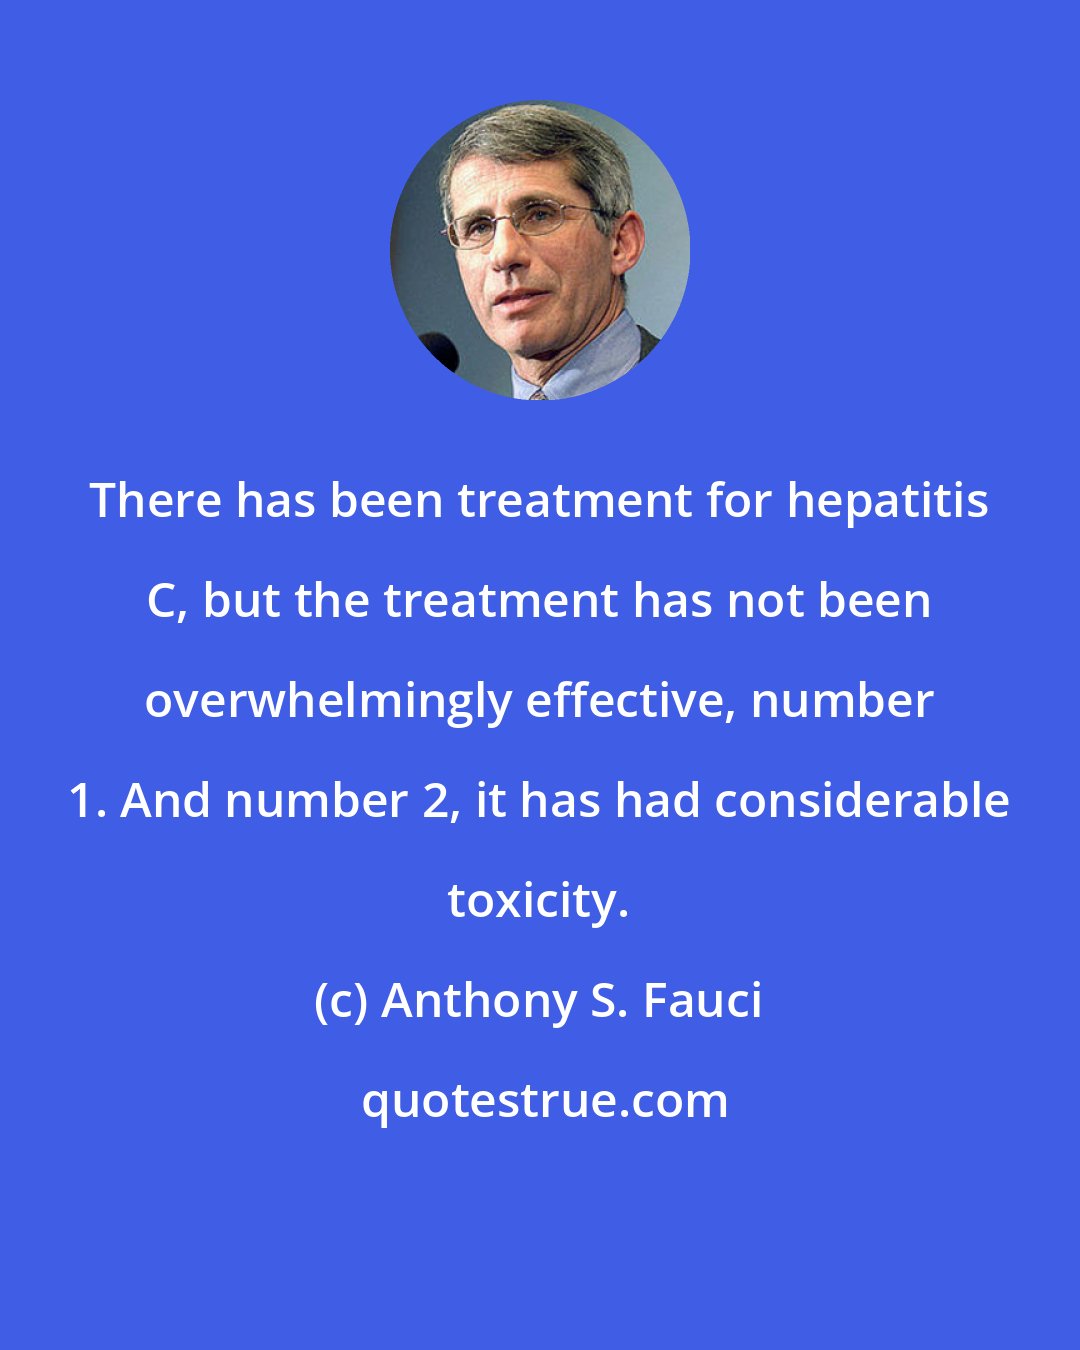 Anthony S. Fauci: There has been treatment for hepatitis C, but the treatment has not been overwhelmingly effective, number 1. And number 2, it has had considerable toxicity.